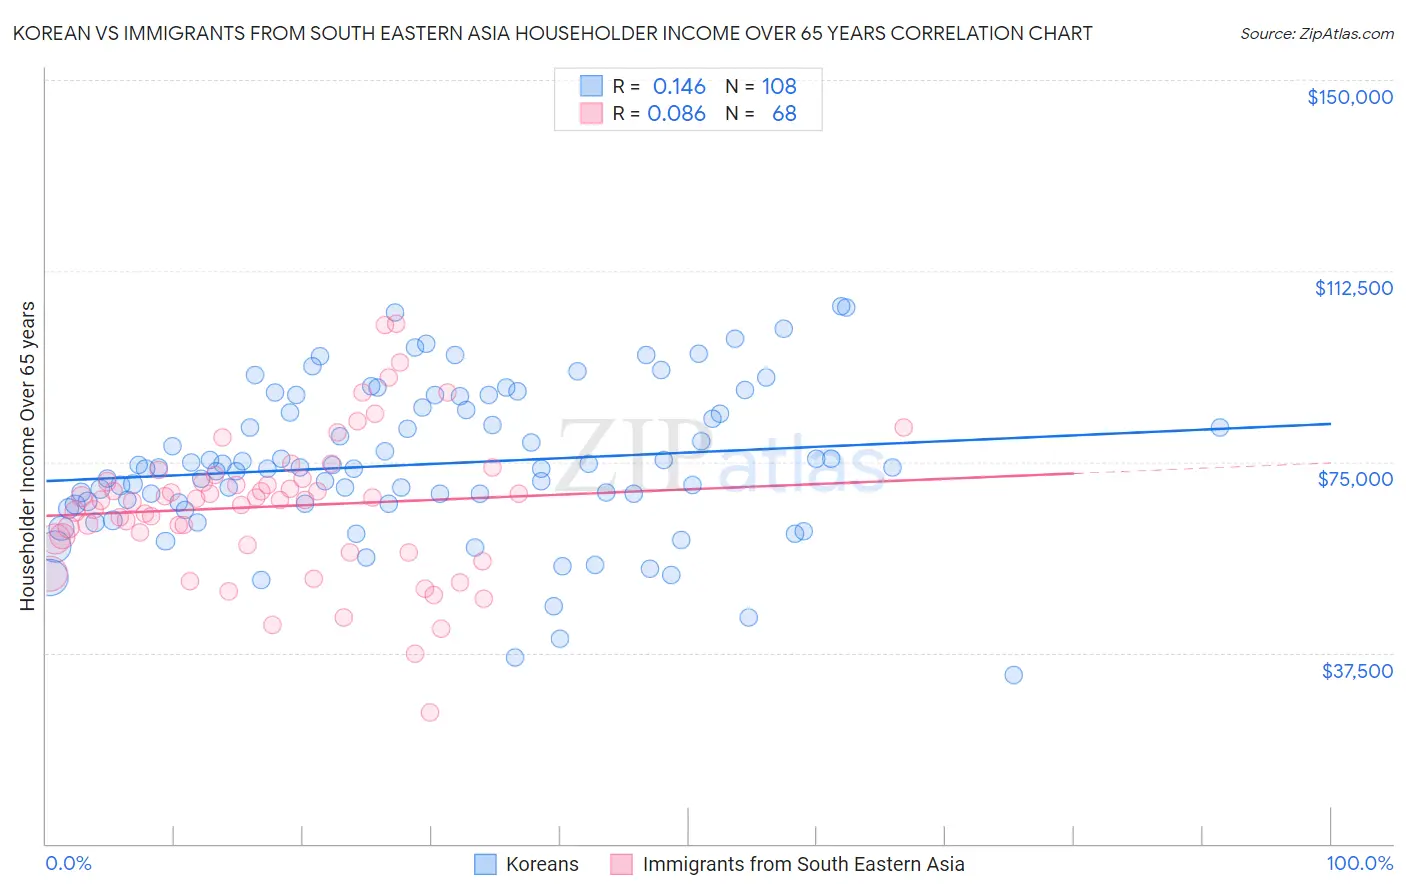 Korean vs Immigrants from South Eastern Asia Householder Income Over 65 years